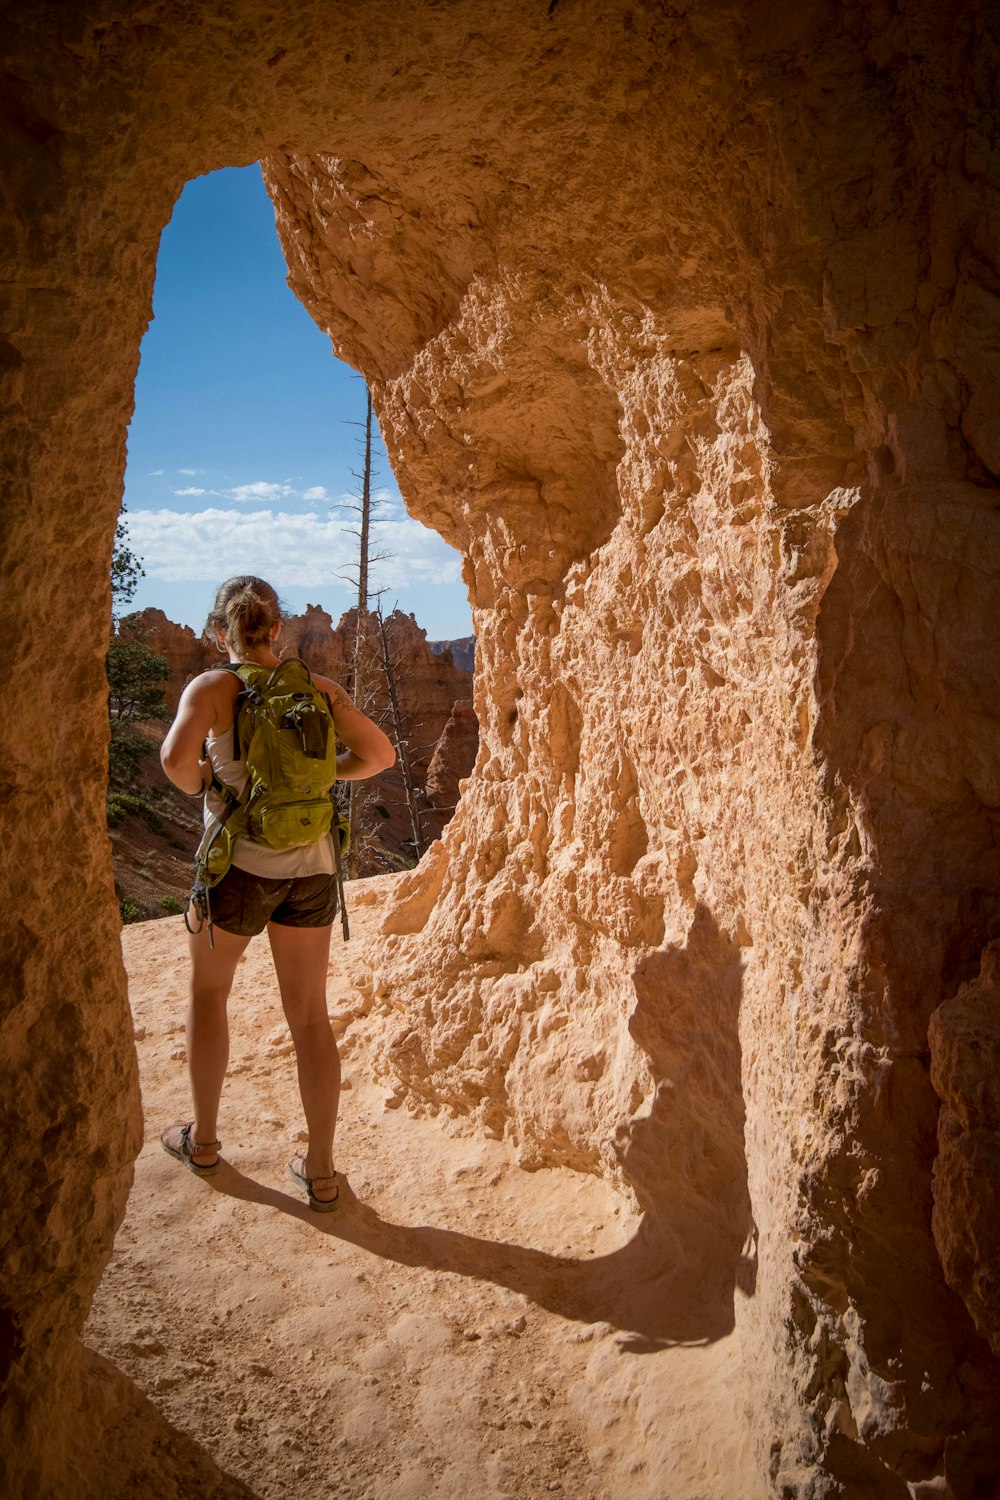 woman carrying backpack standing in cave passage